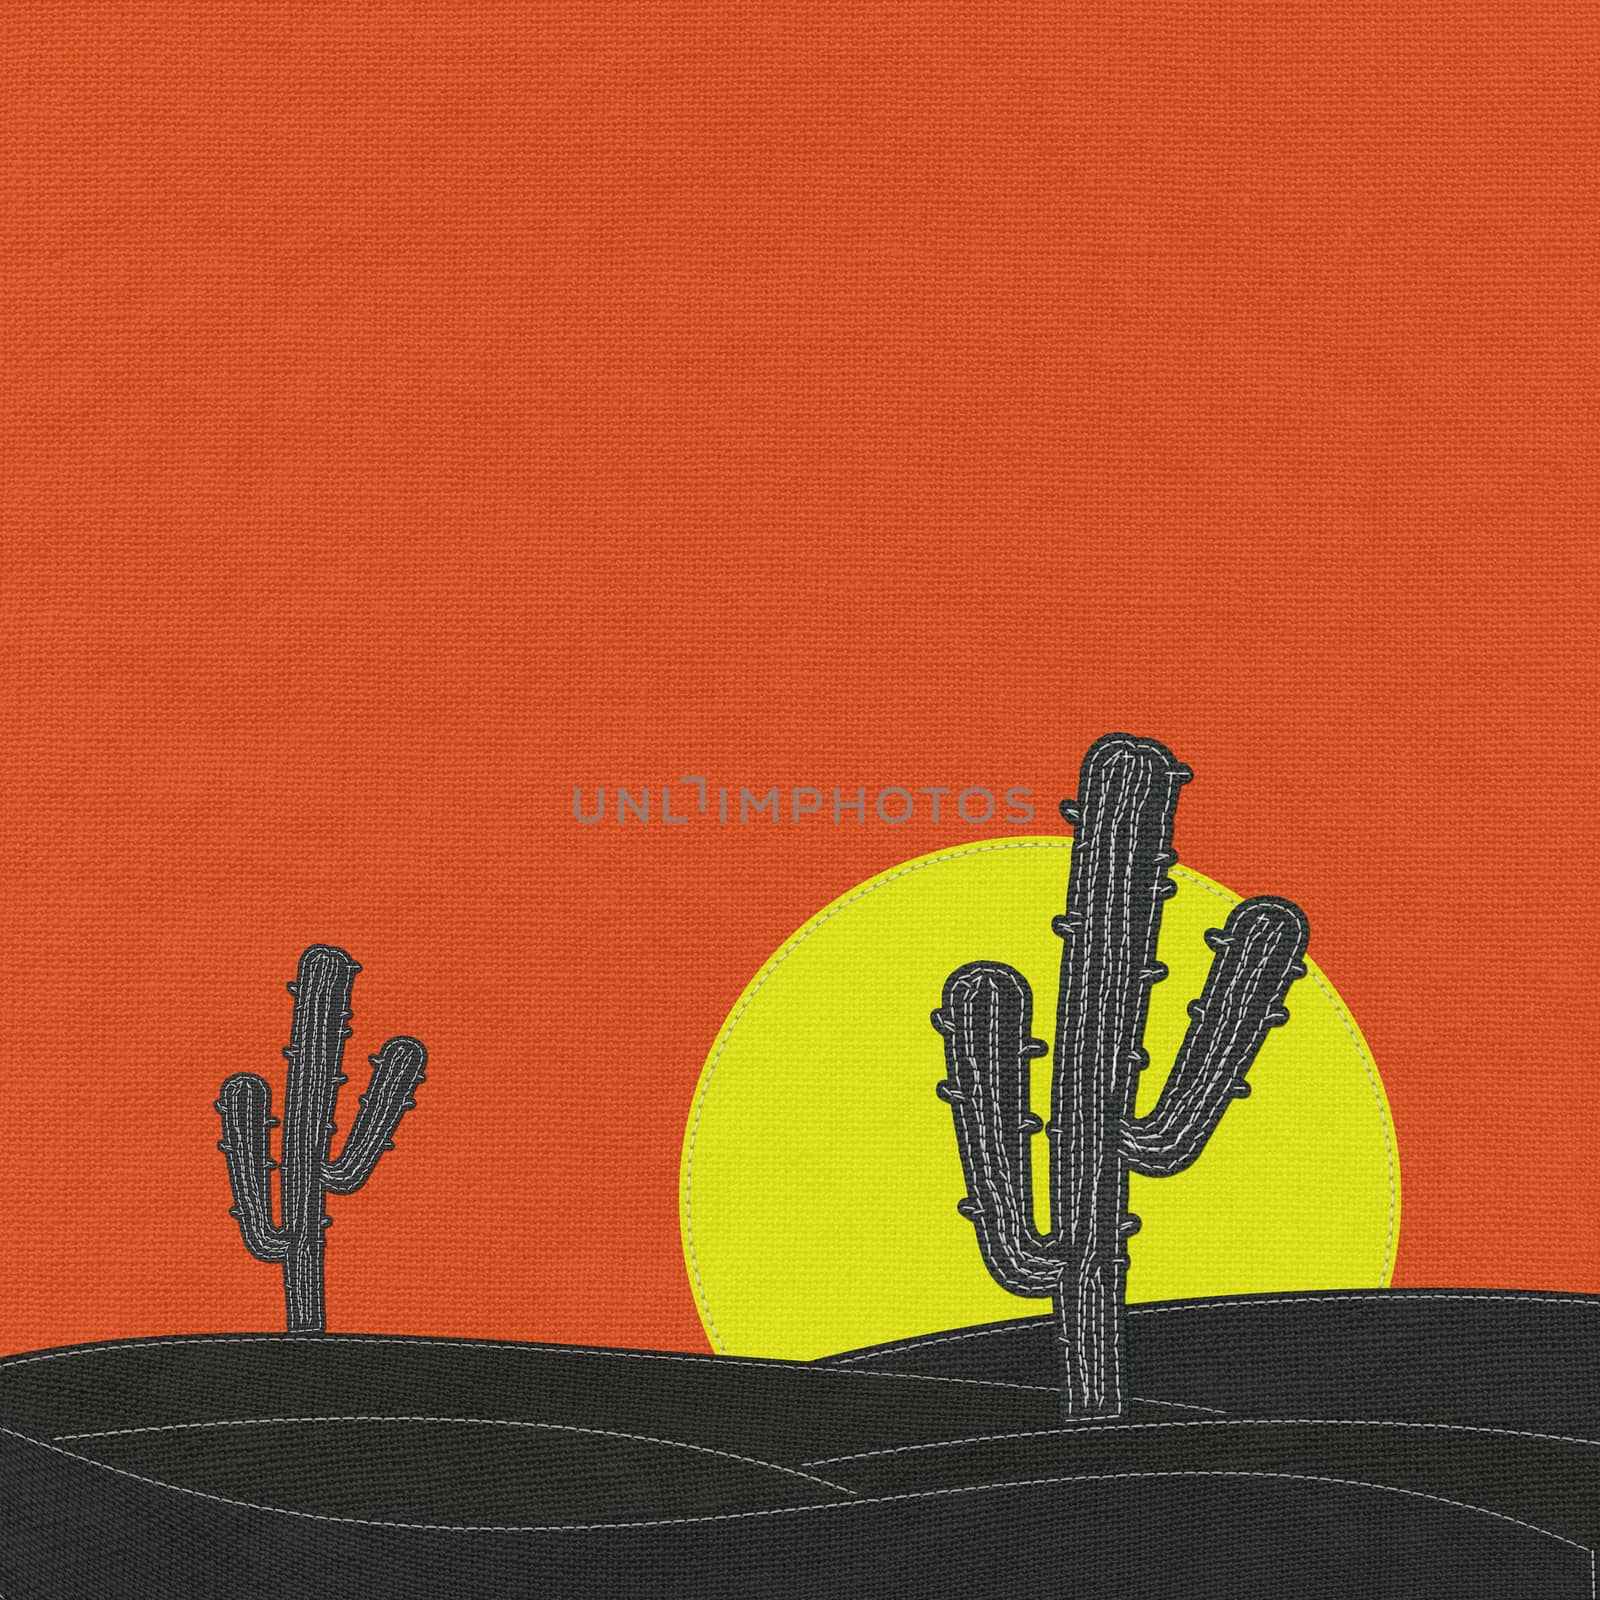 Cactus in the desert with stitch style on fabric background